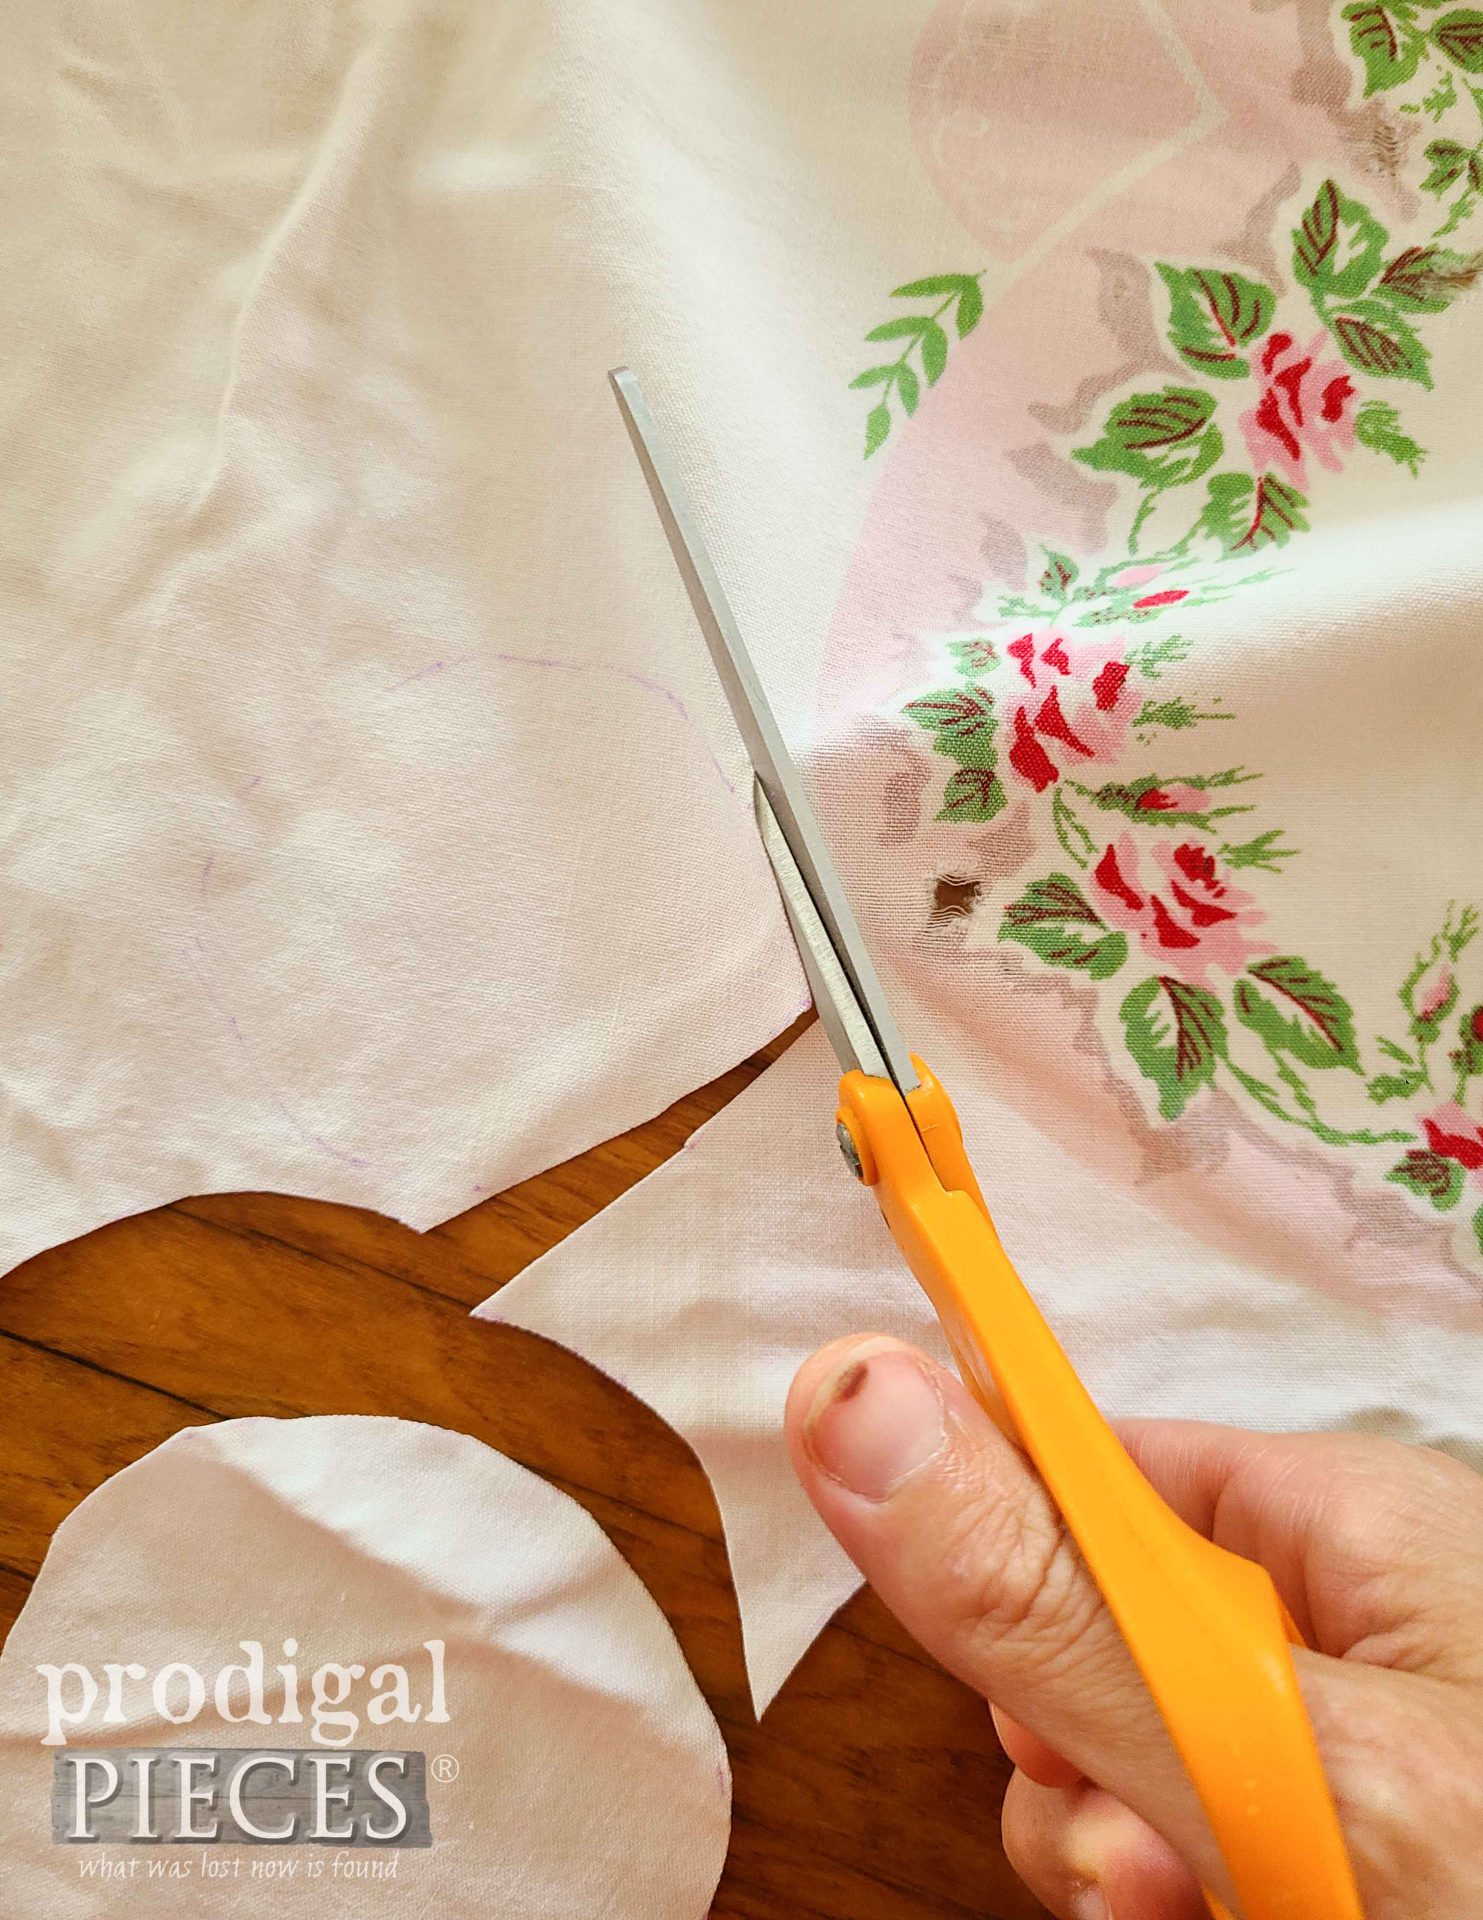 Cutting Vintage Tablecloth for Heirloom Doll | prodigalpieces.com #prodigalpieces